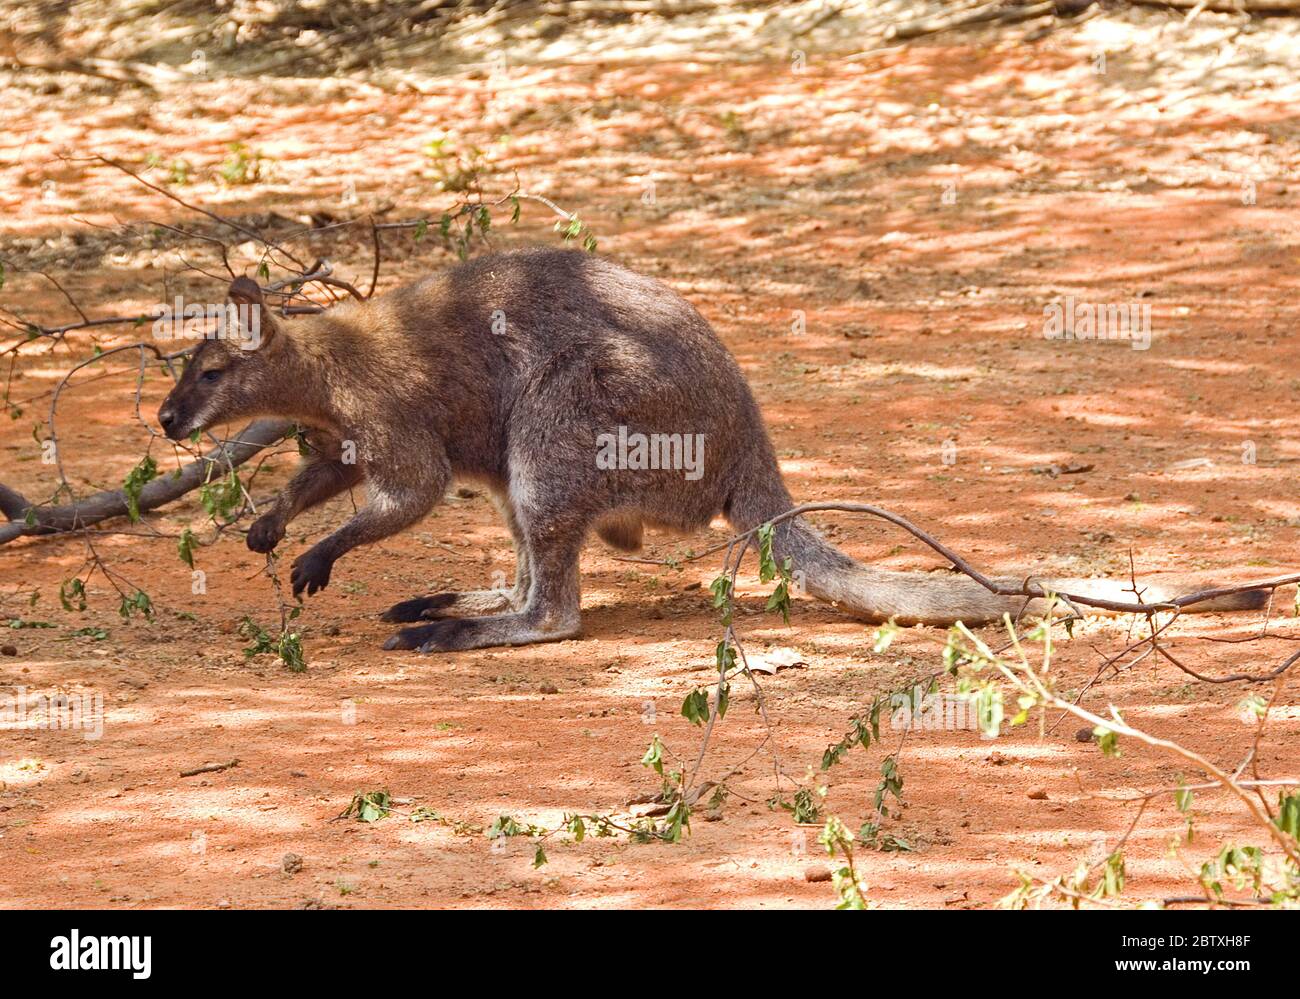 Red-necked Wallaby - Macropus rufogriseus, popular mammal from Australian bushes and savannas. Stock Photo